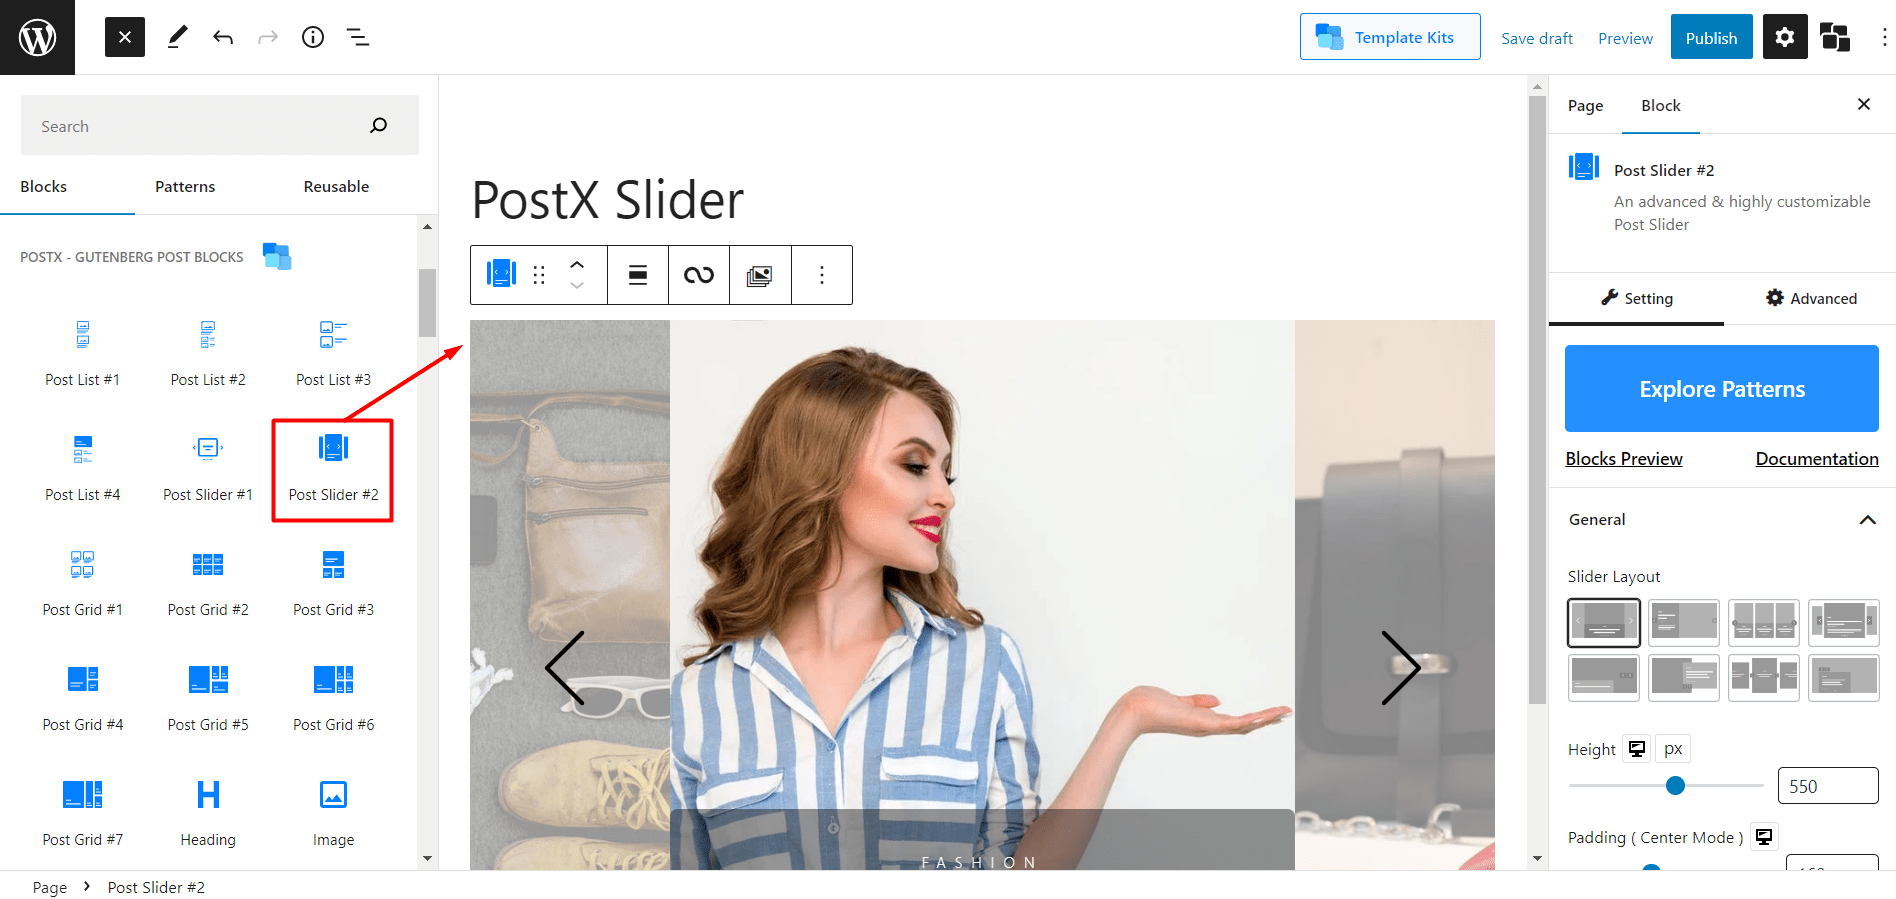 The Newest Slider Block of PostX Brings Amazing New Layout Opportunities